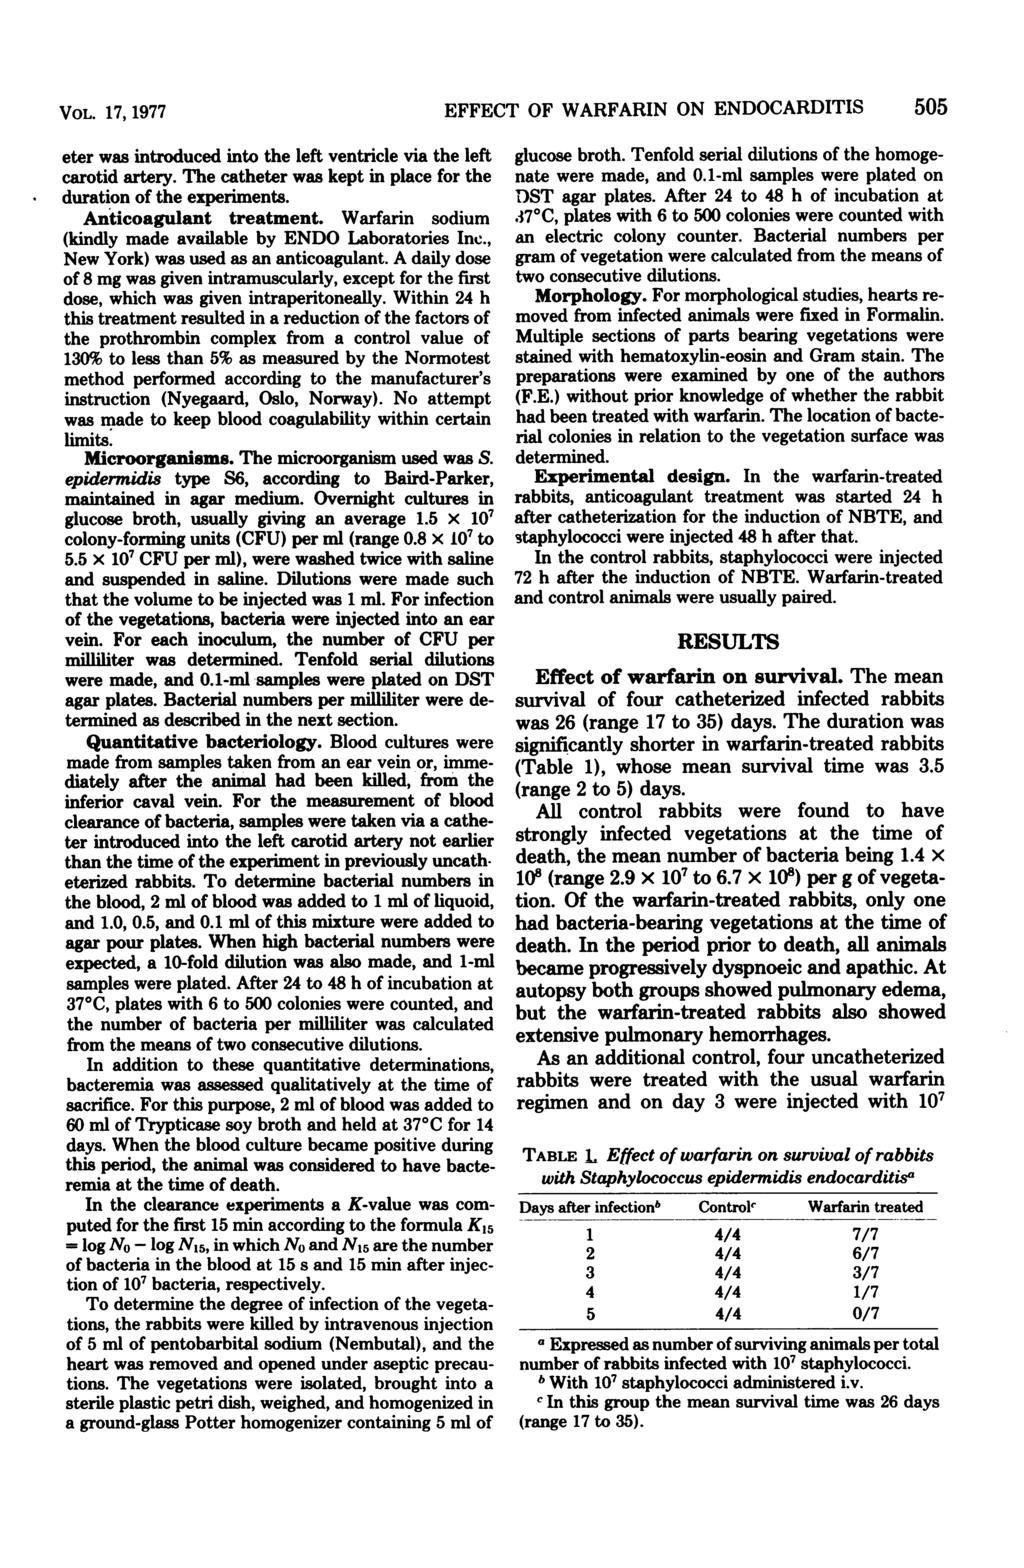 VOL. 17, 1977 eter was introduced into the left ventricle via the left carotid artery. The catheter was kept in place for the duration of the experiments. Anticoagulant treatment.